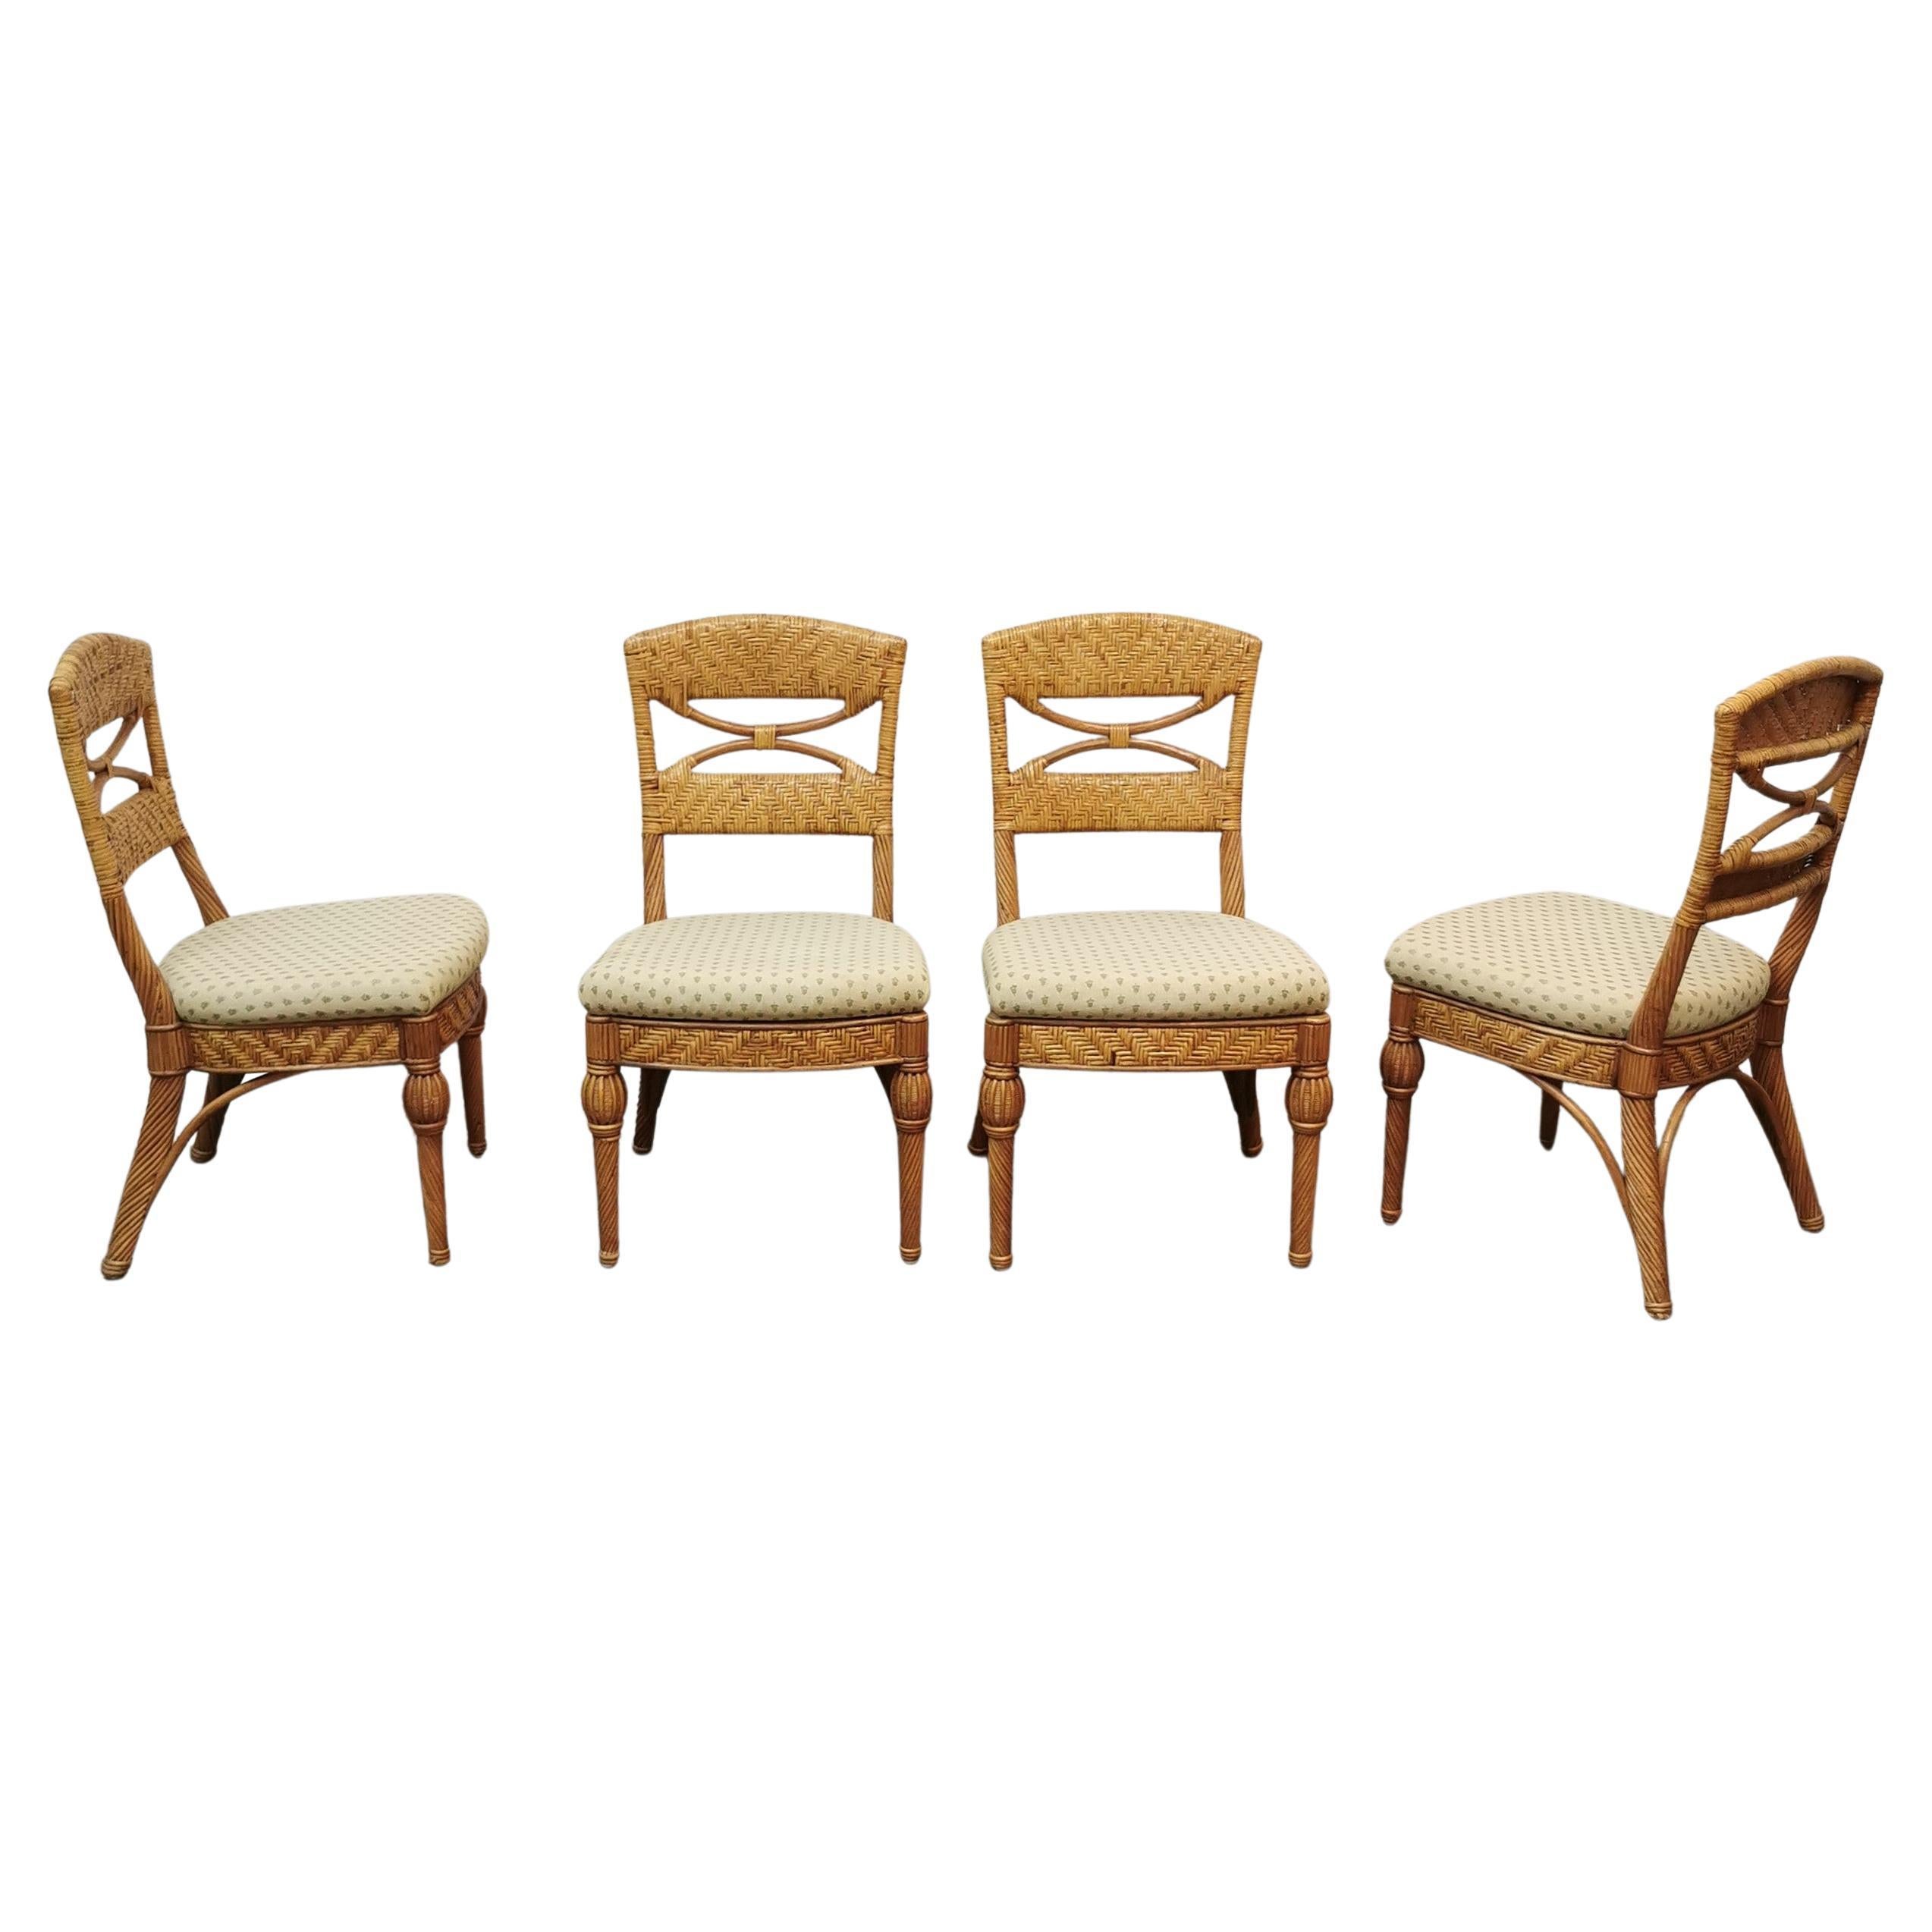 Dining Room Chairs Wicker Fabric Vivai del Sud Midcentury Italy 1980s Set of 4 For Sale